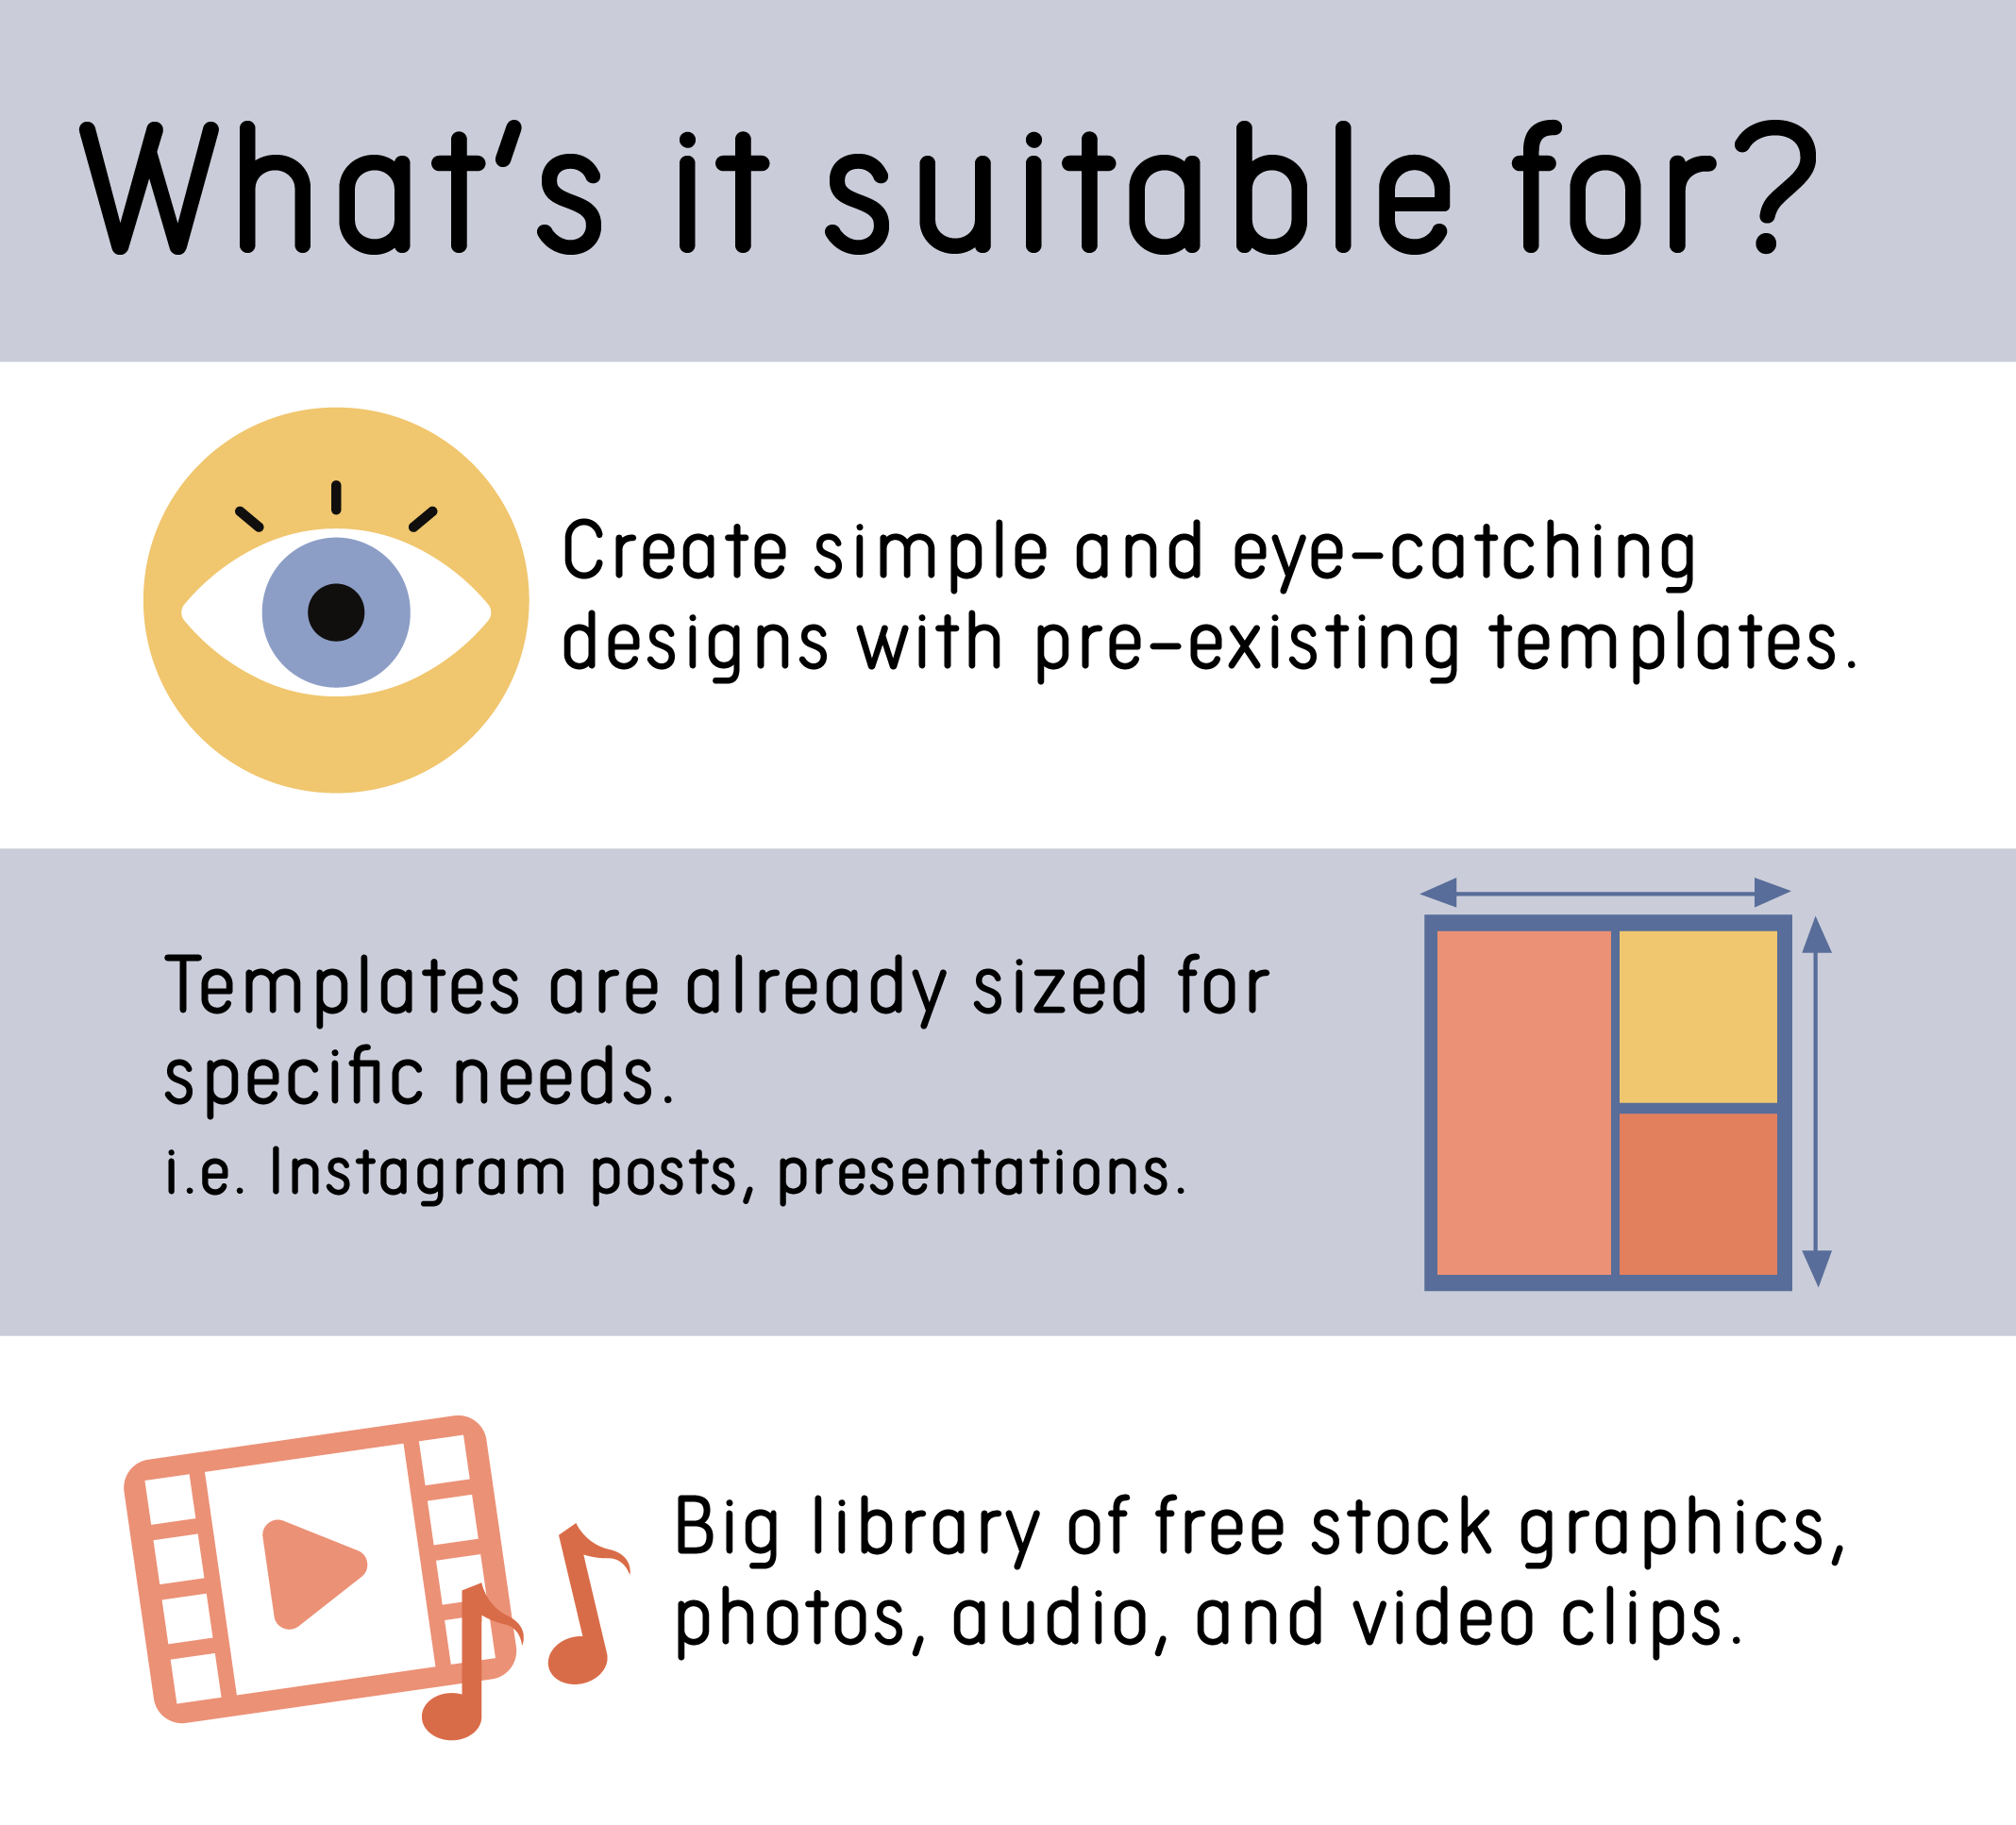 Creating simple and eye-catching designs with pre-existing templates. Templates are already sized for specific needs i.e. Instagram posts, presentations. Big library of free stock graphics, photos, audio and video clips.